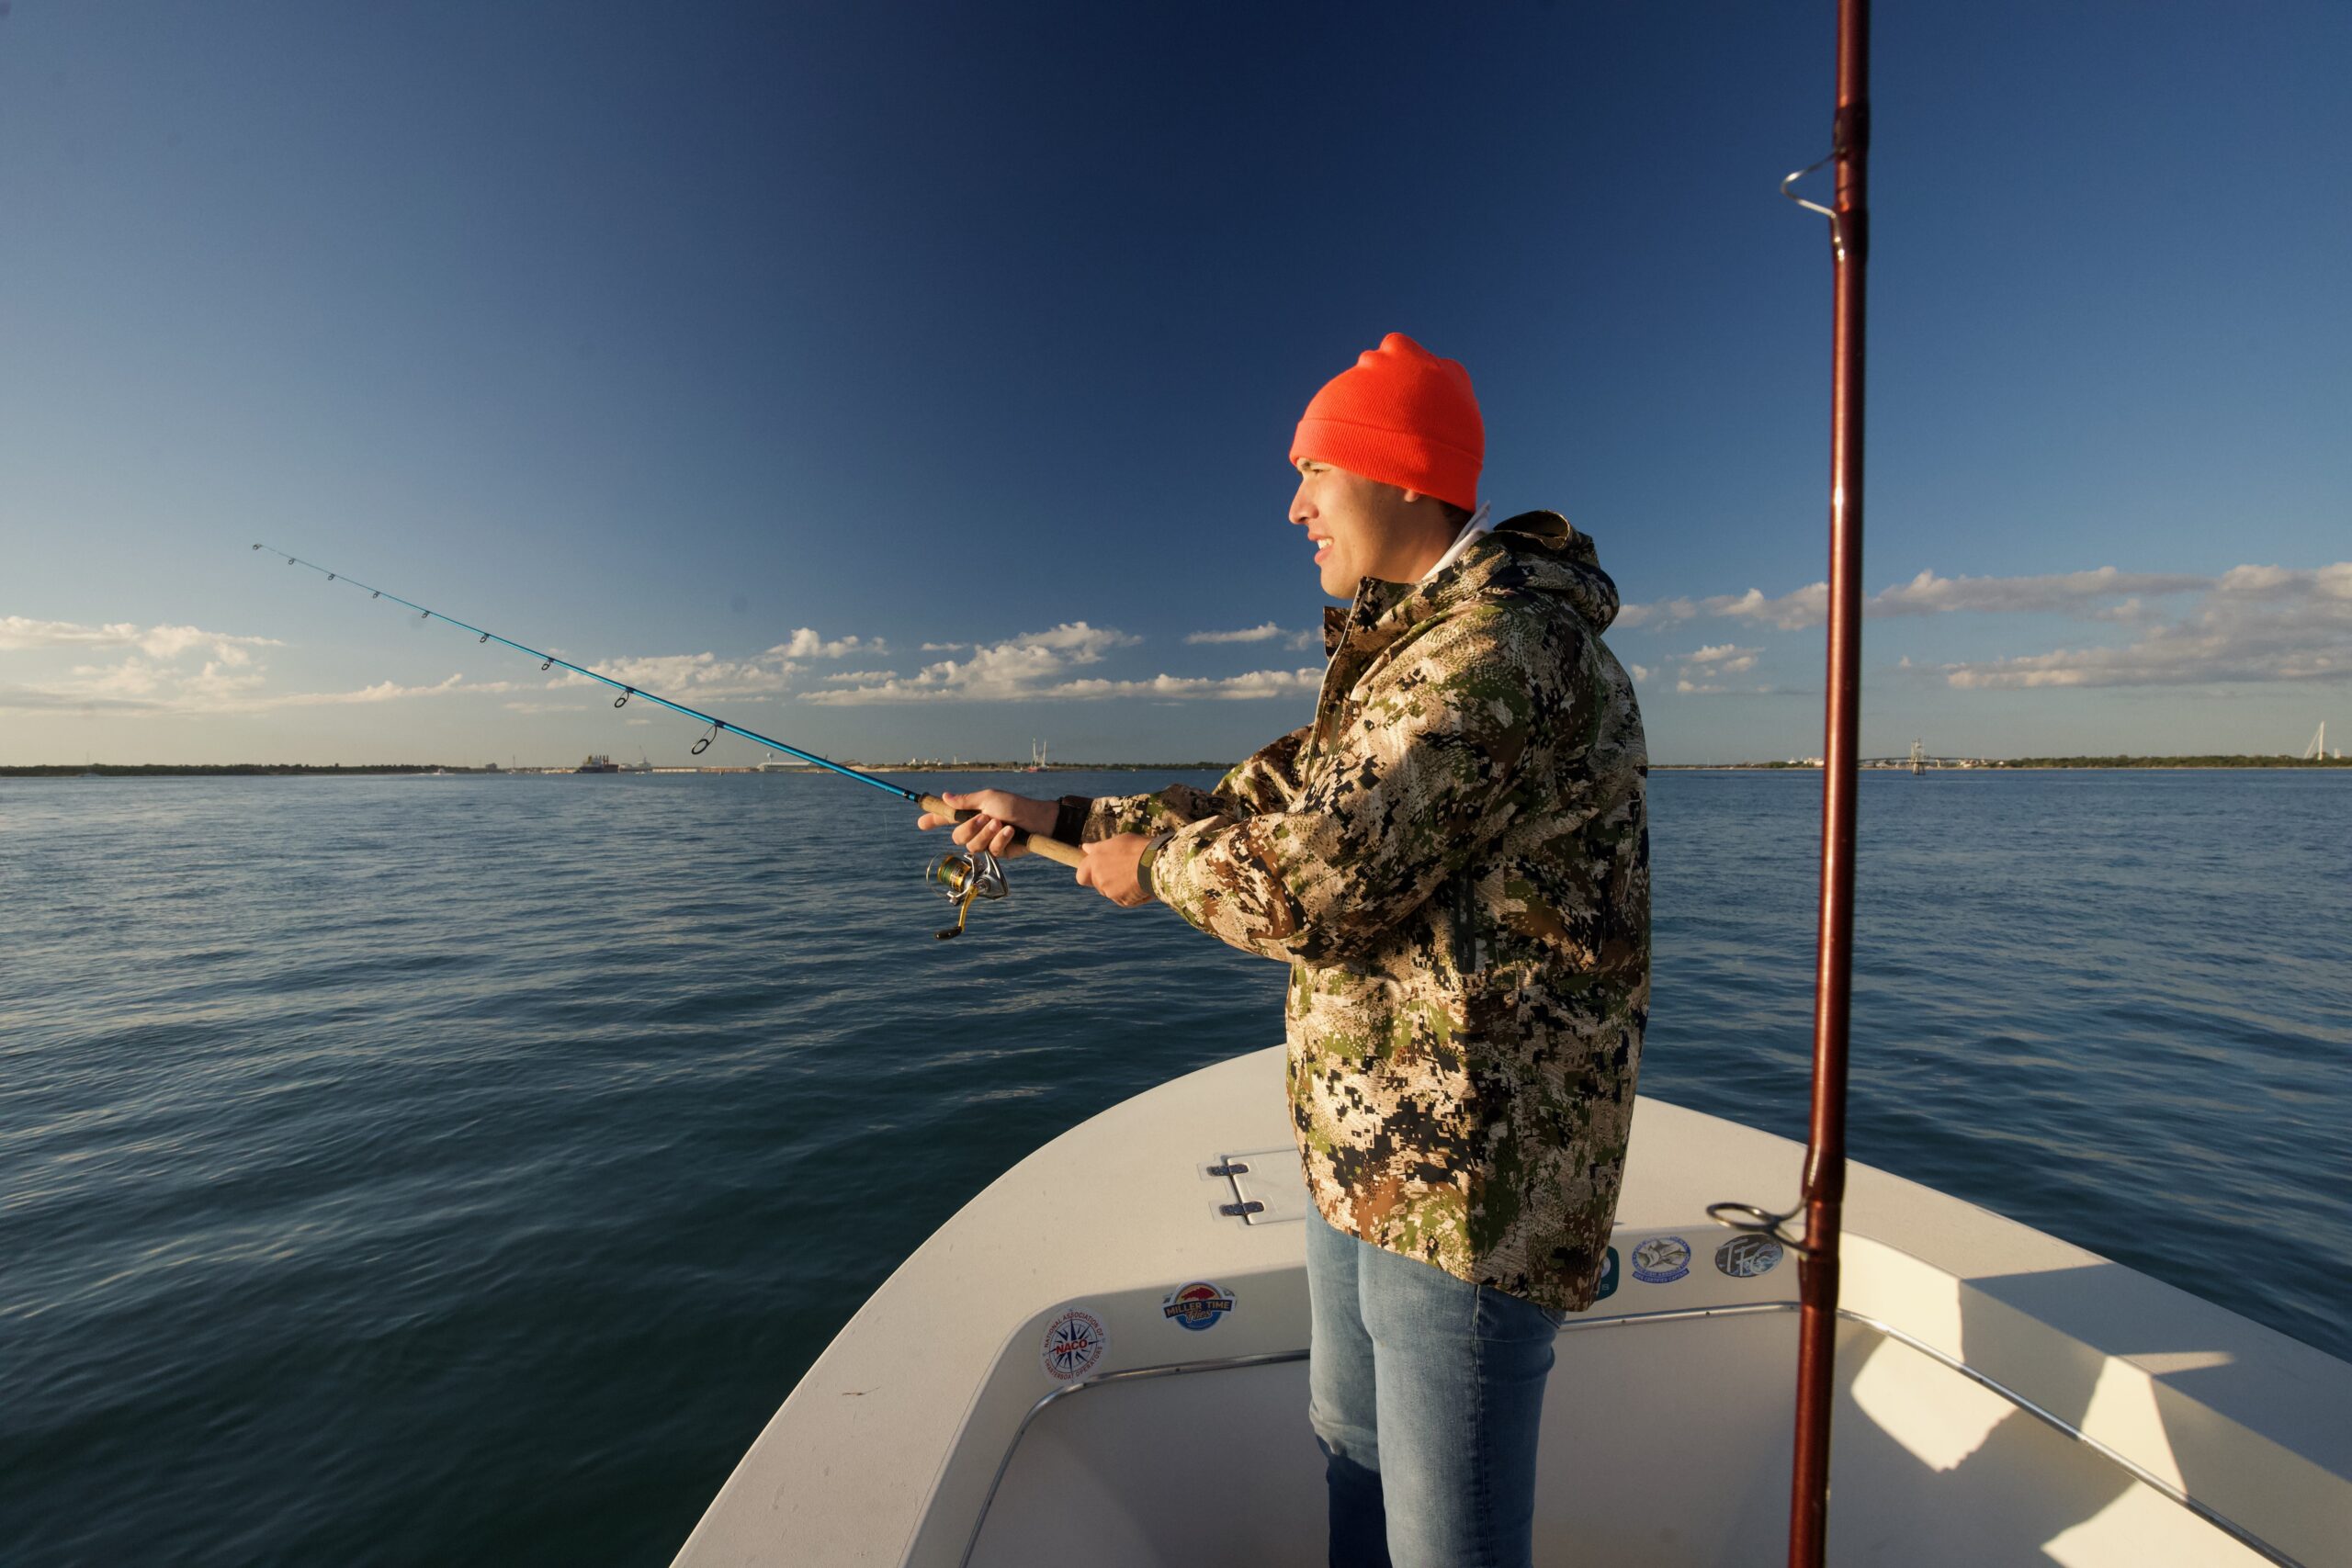 Fishing Online Australia – Your One-Stop Shop for All Things Fishing!